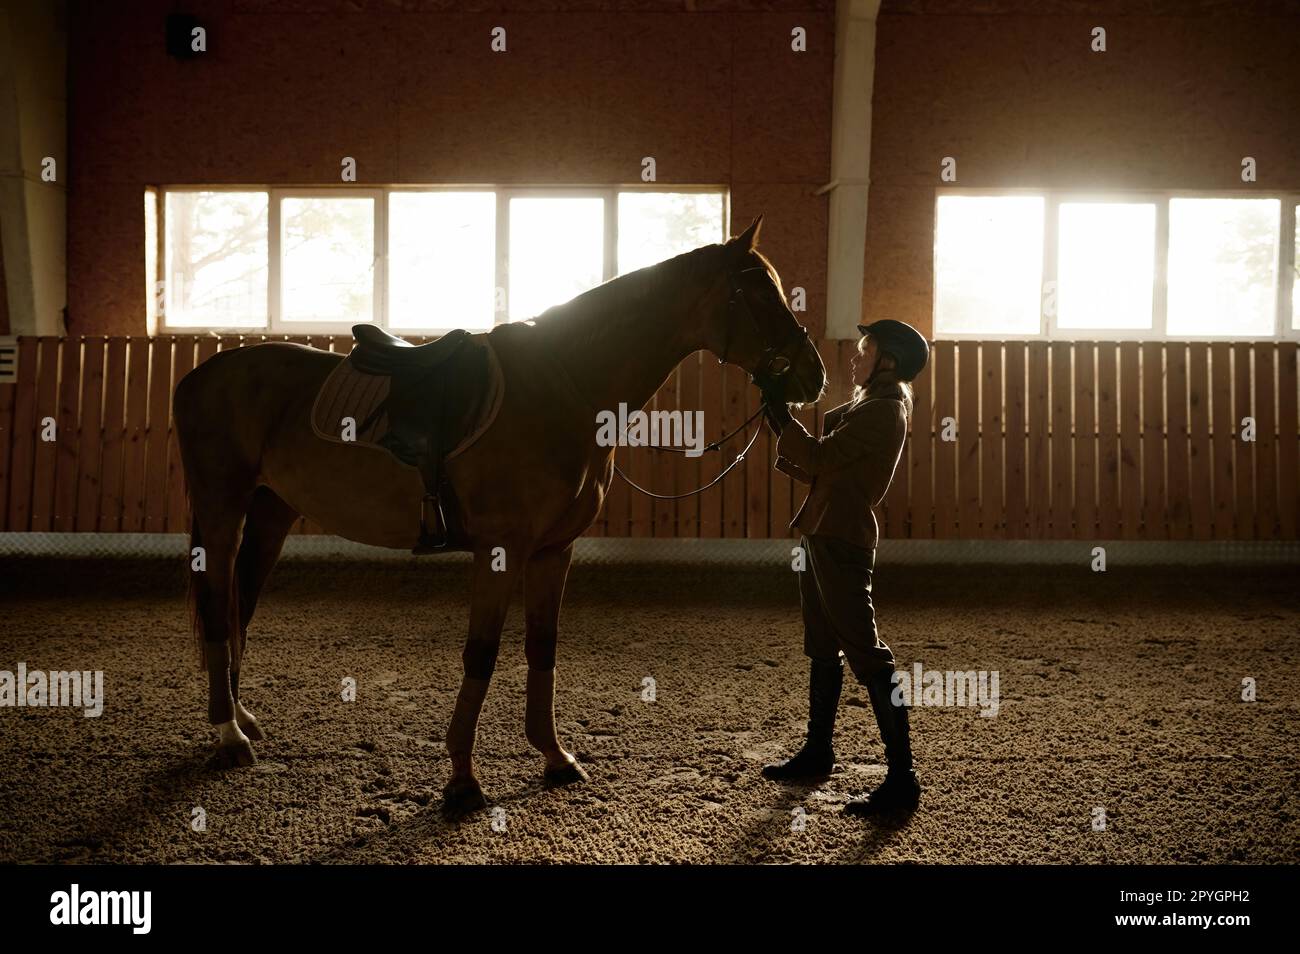 Woman rider harnessed horse in stable indoor paddock Stock Photo